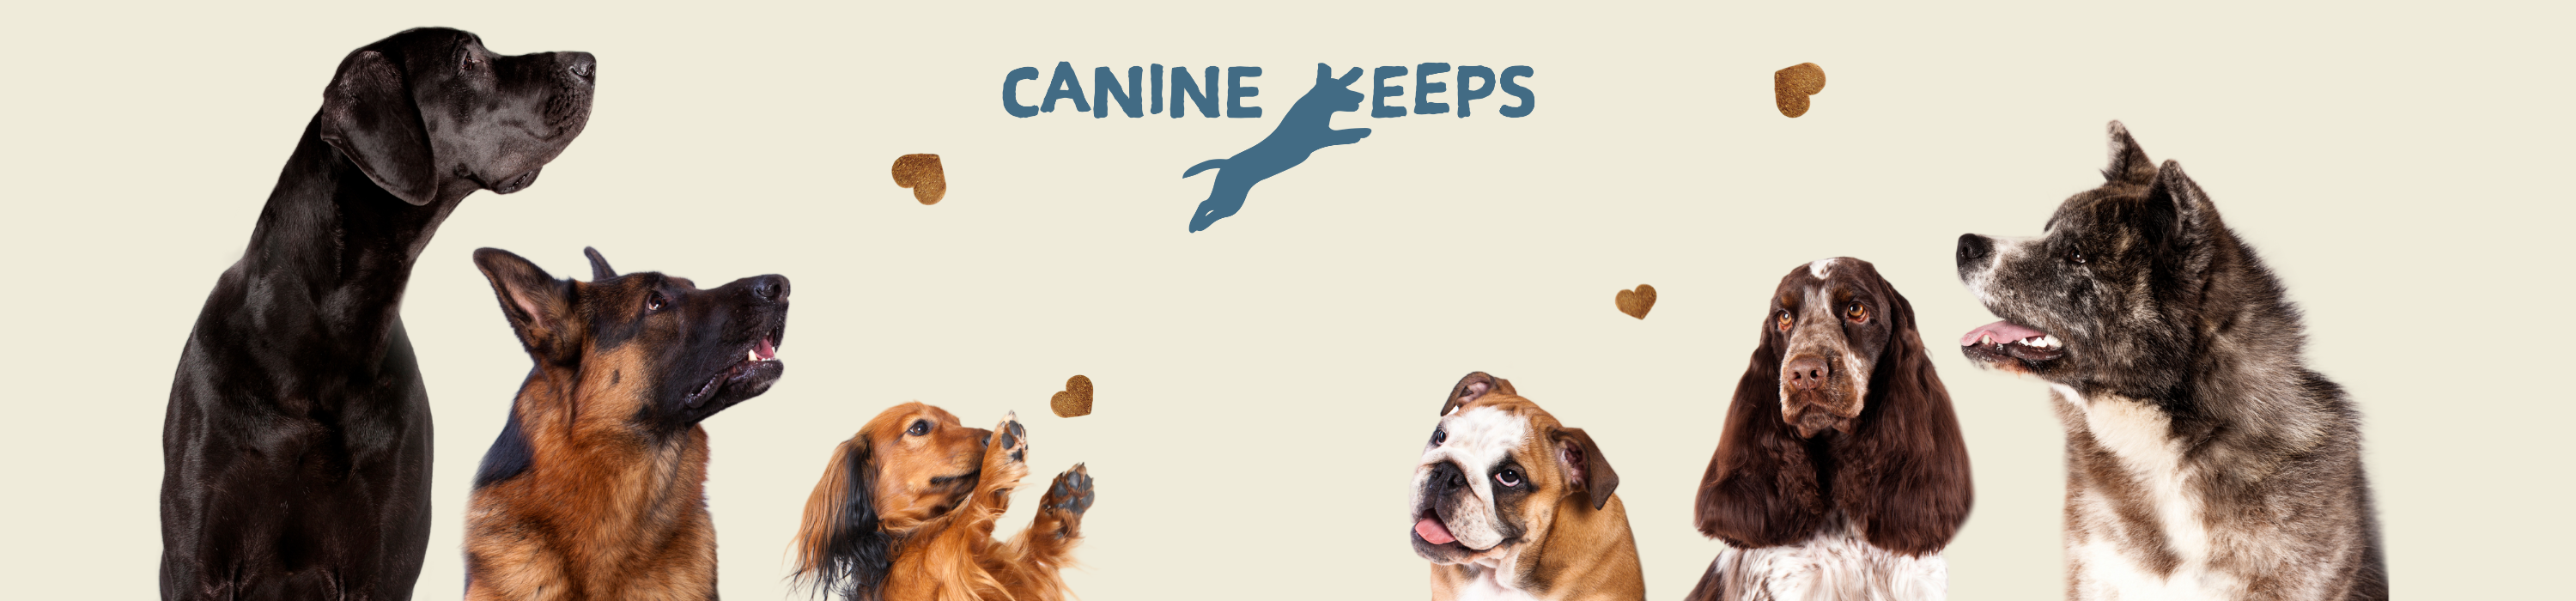 Shop All Canine Keeps Products